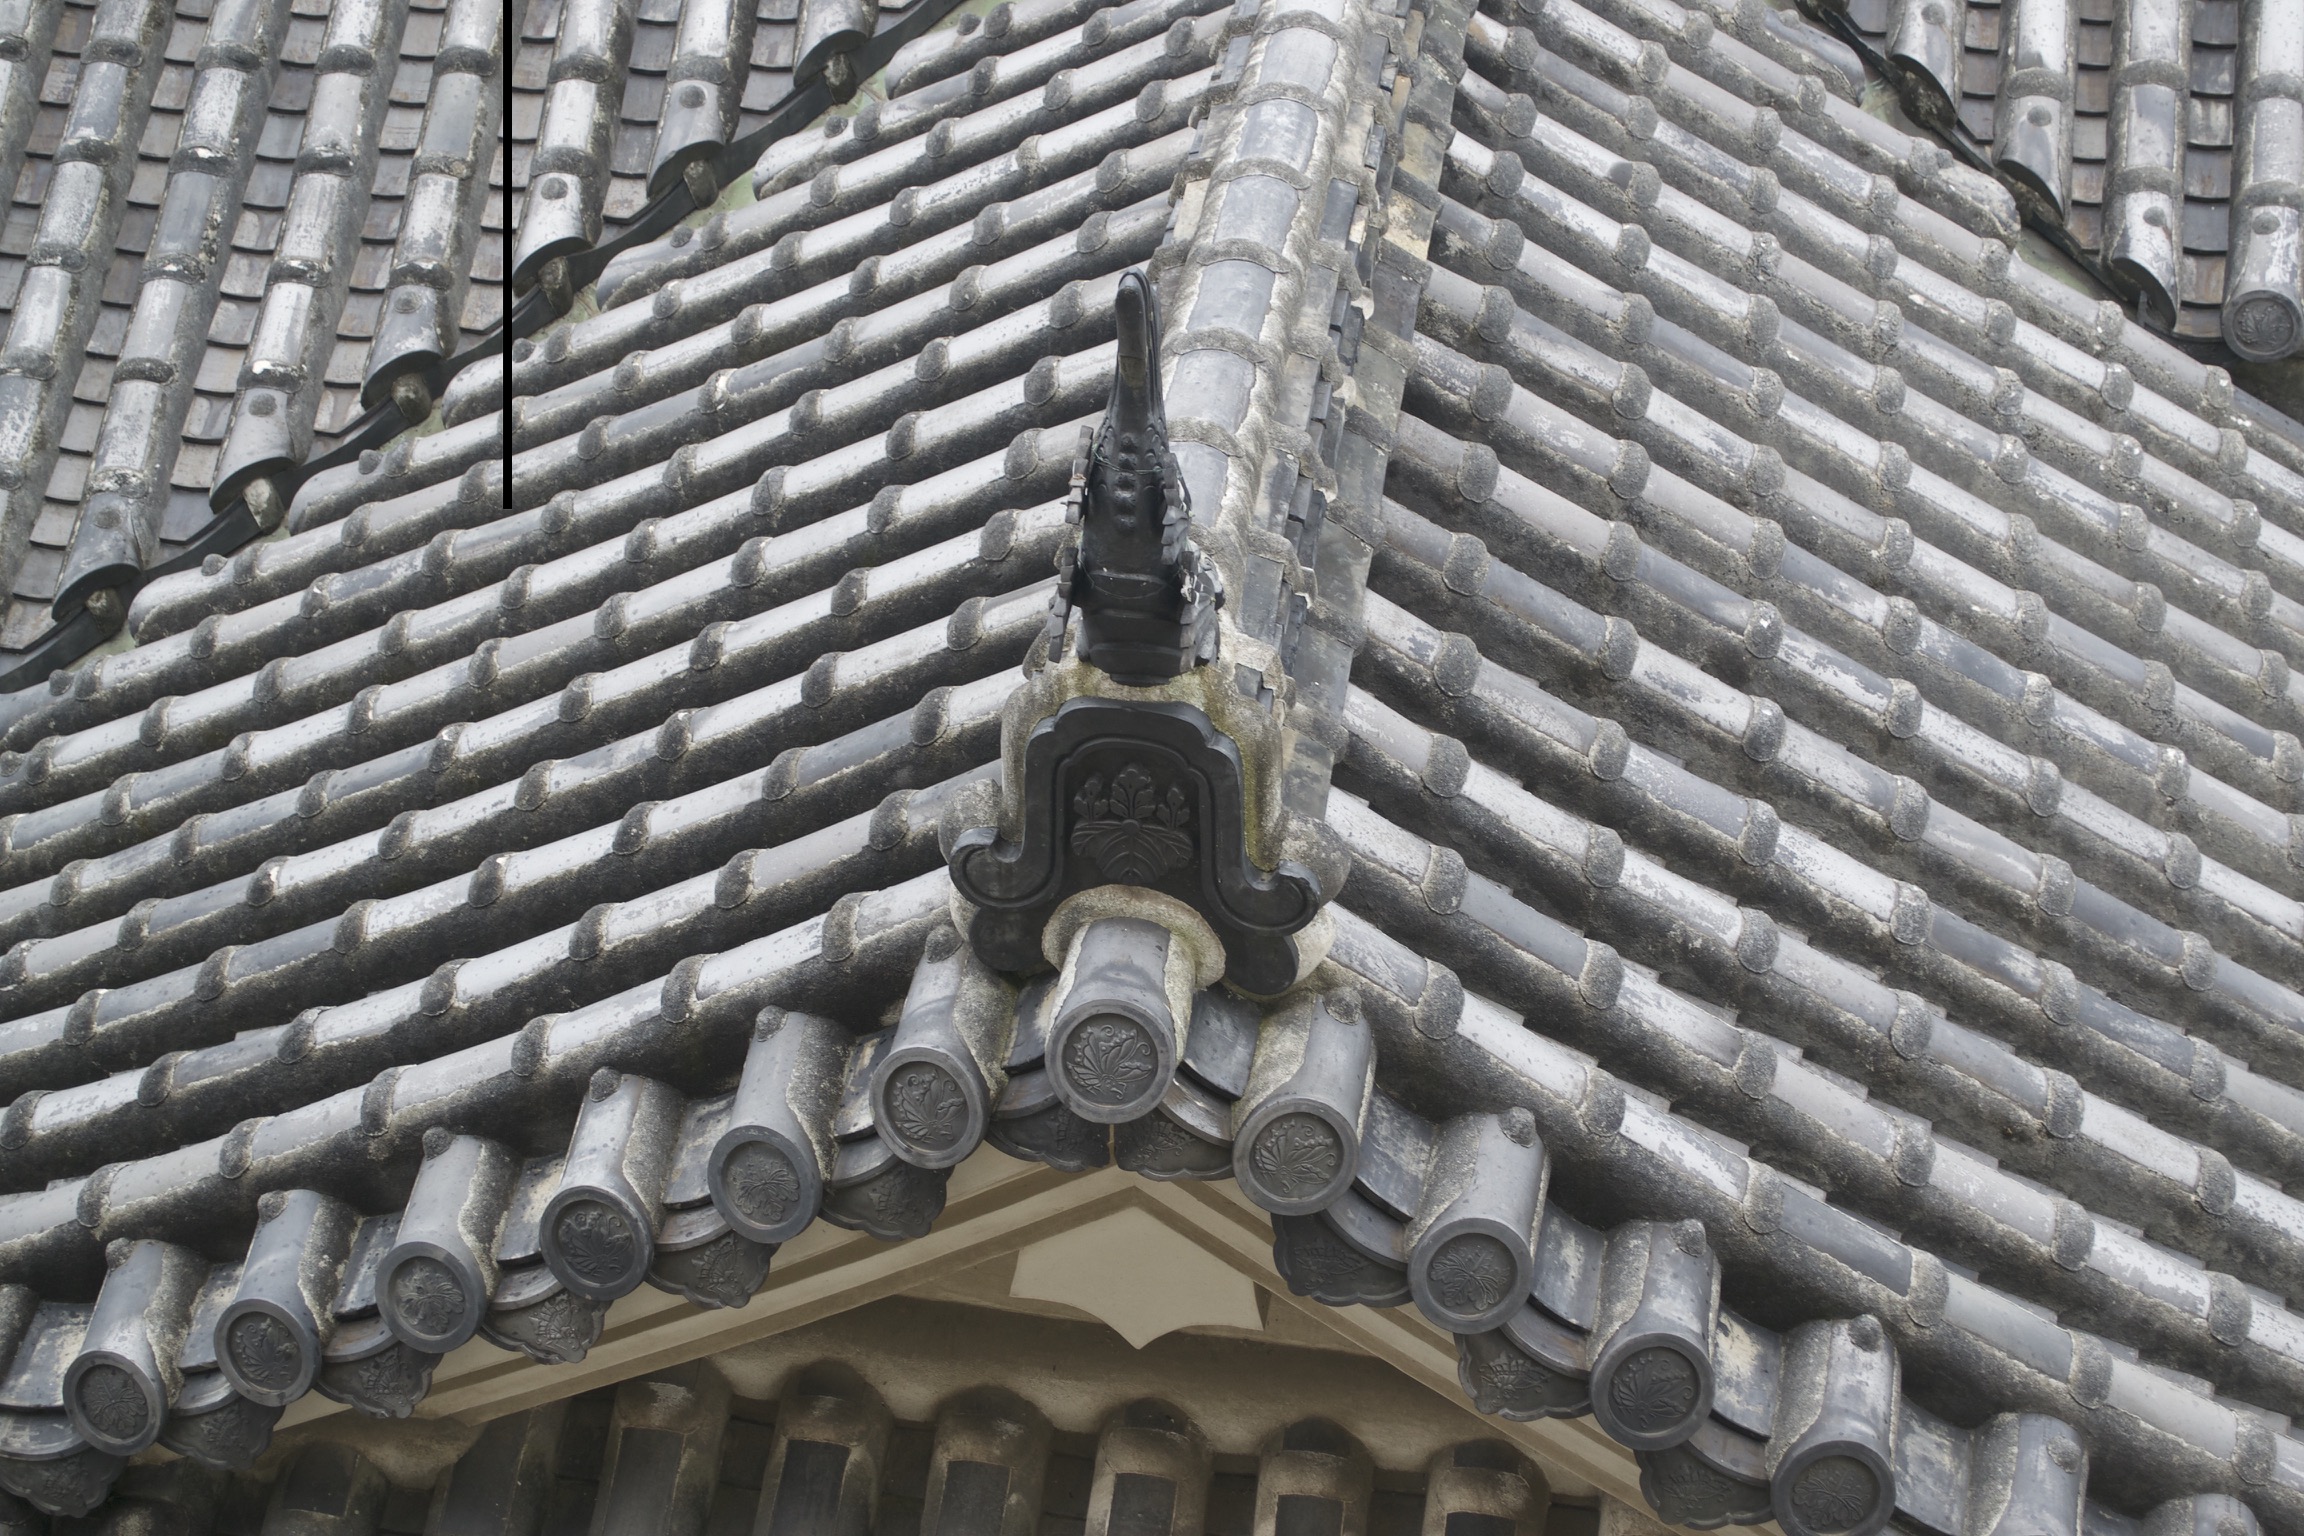 Hand-made cylindrical cermaic tiles cover a roof.